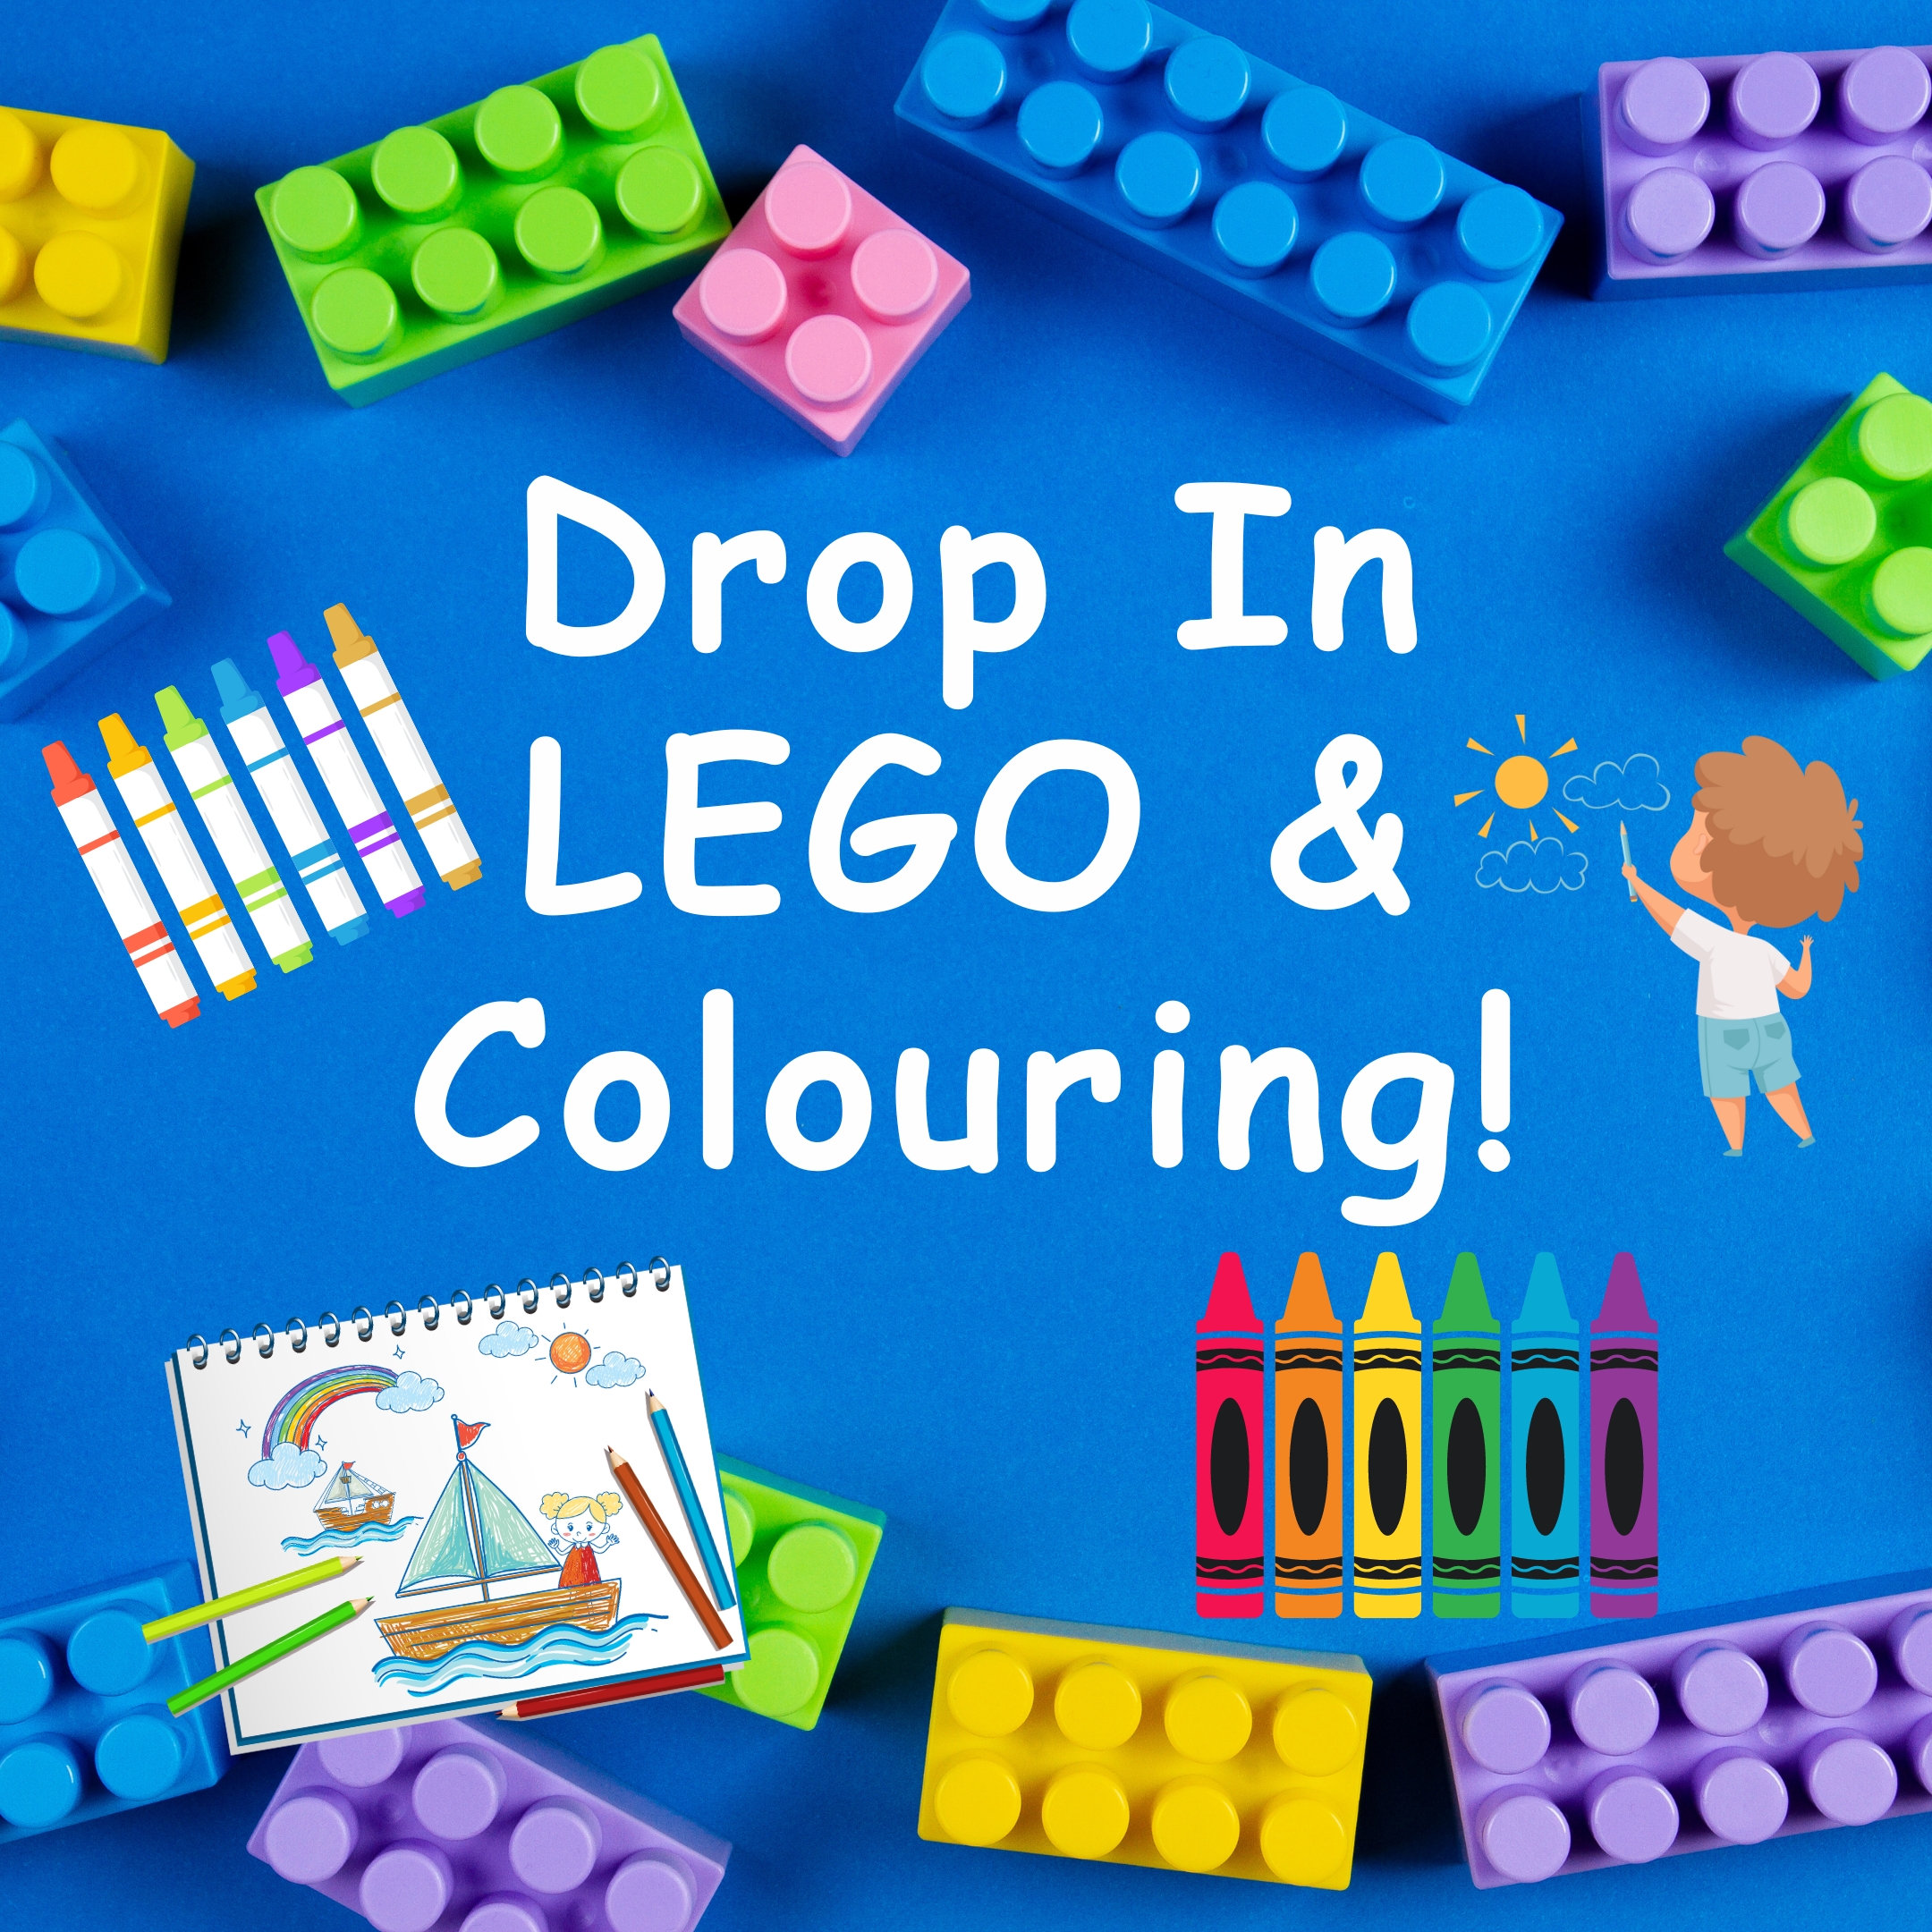 Drop In to the Altona branch during the day to play with the Lego or to do some colouring!